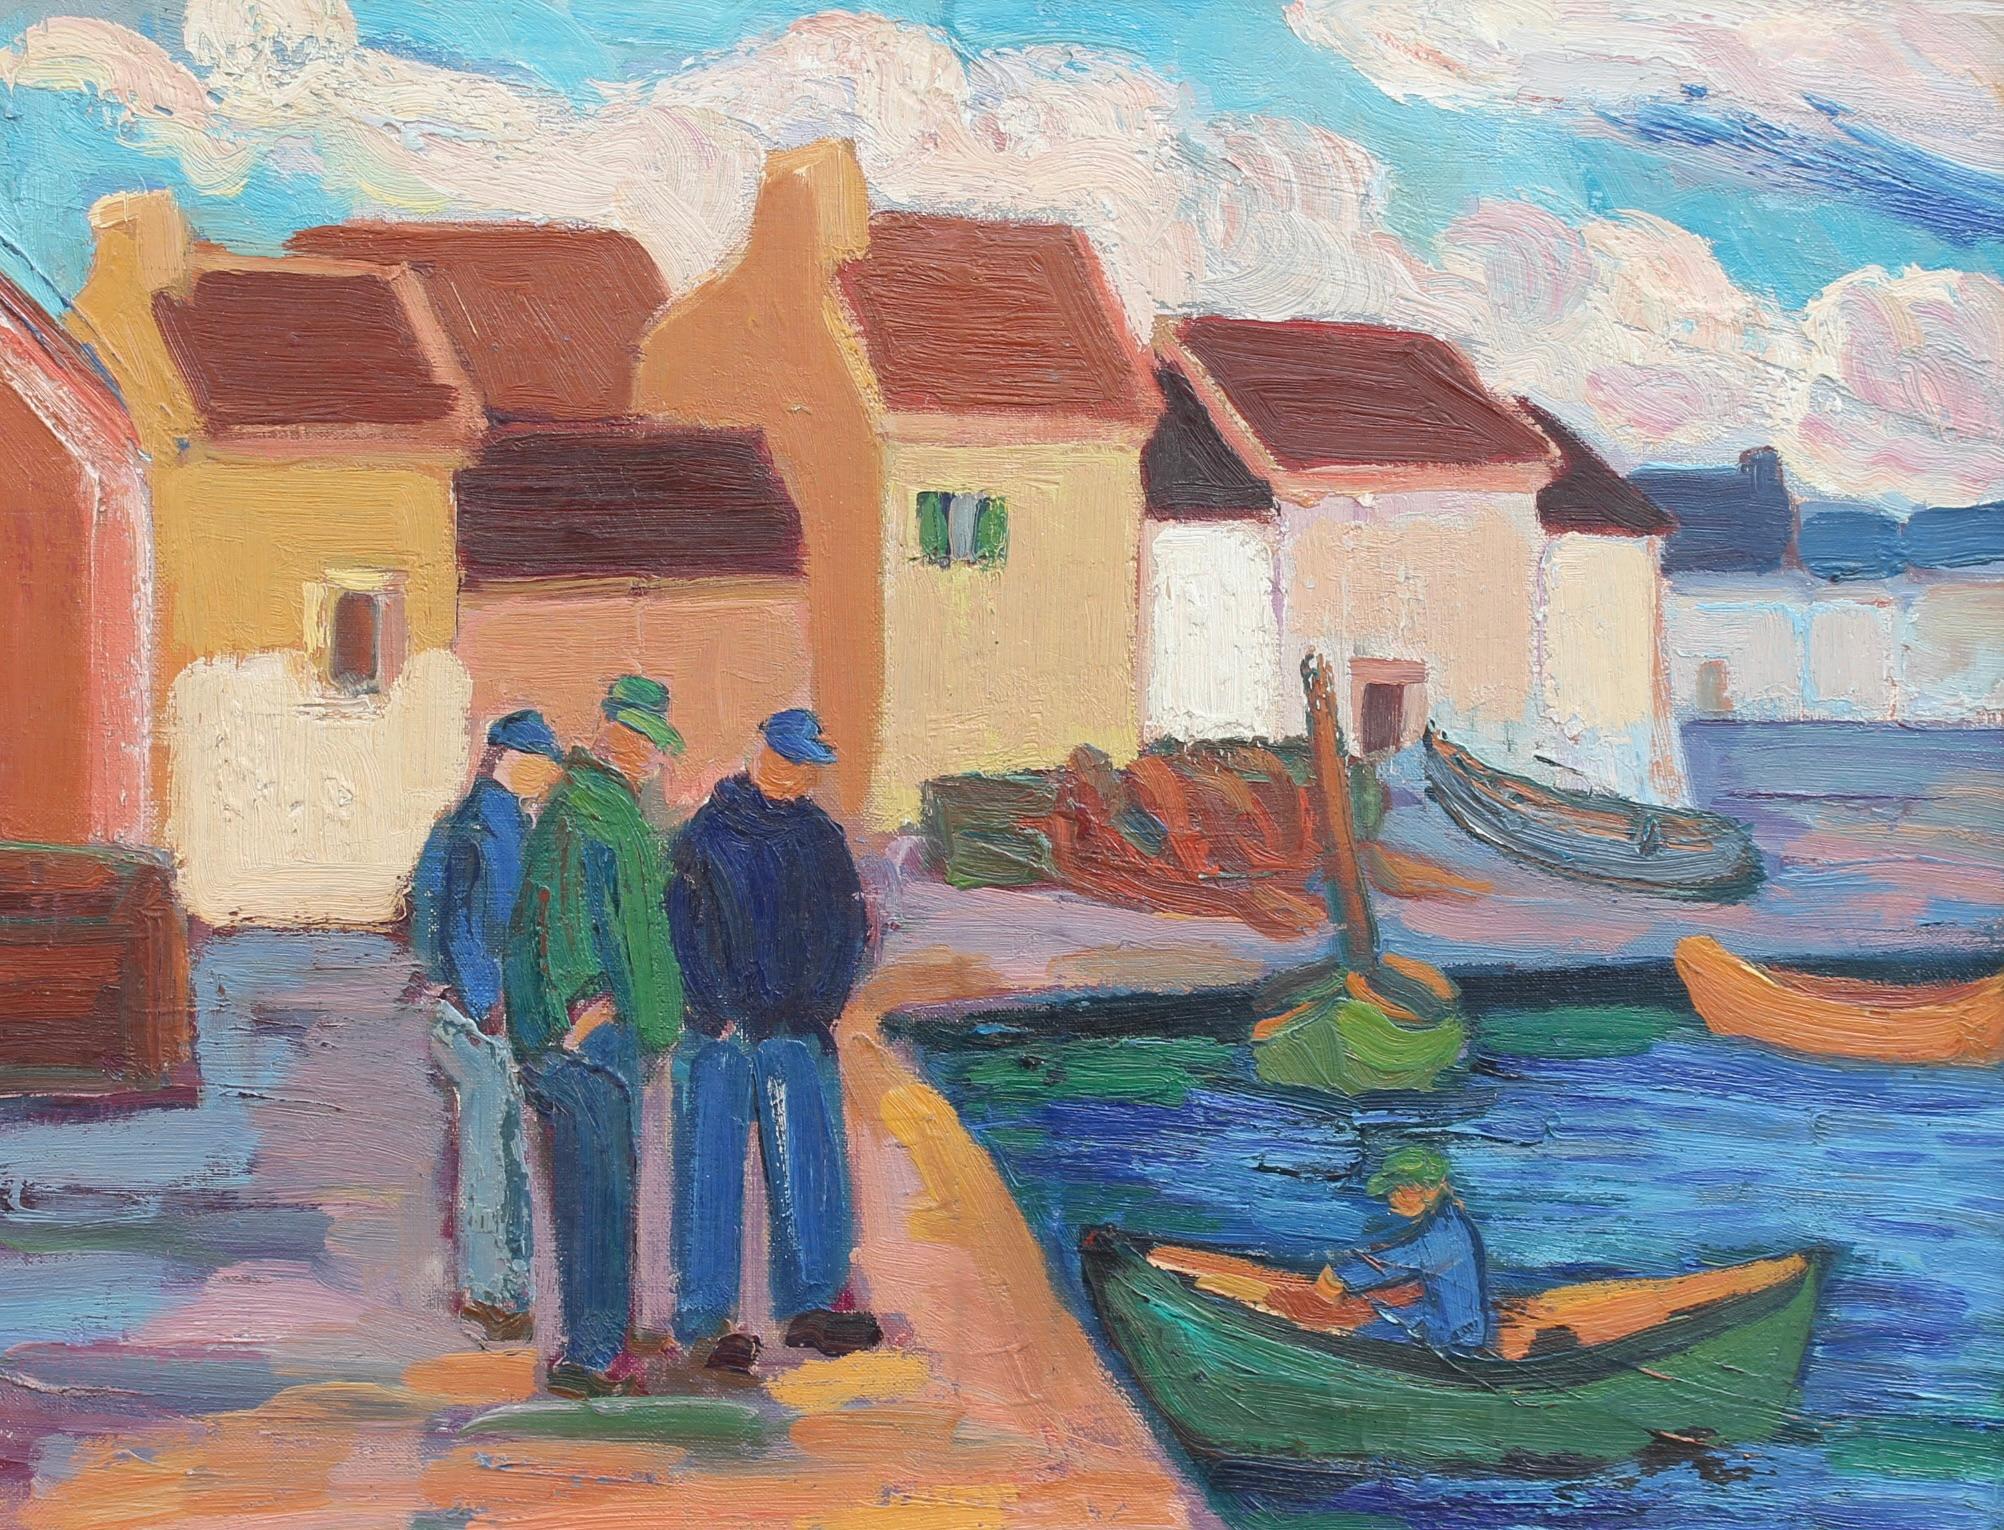 The Fishermen - Modern Painting by Anna Costa